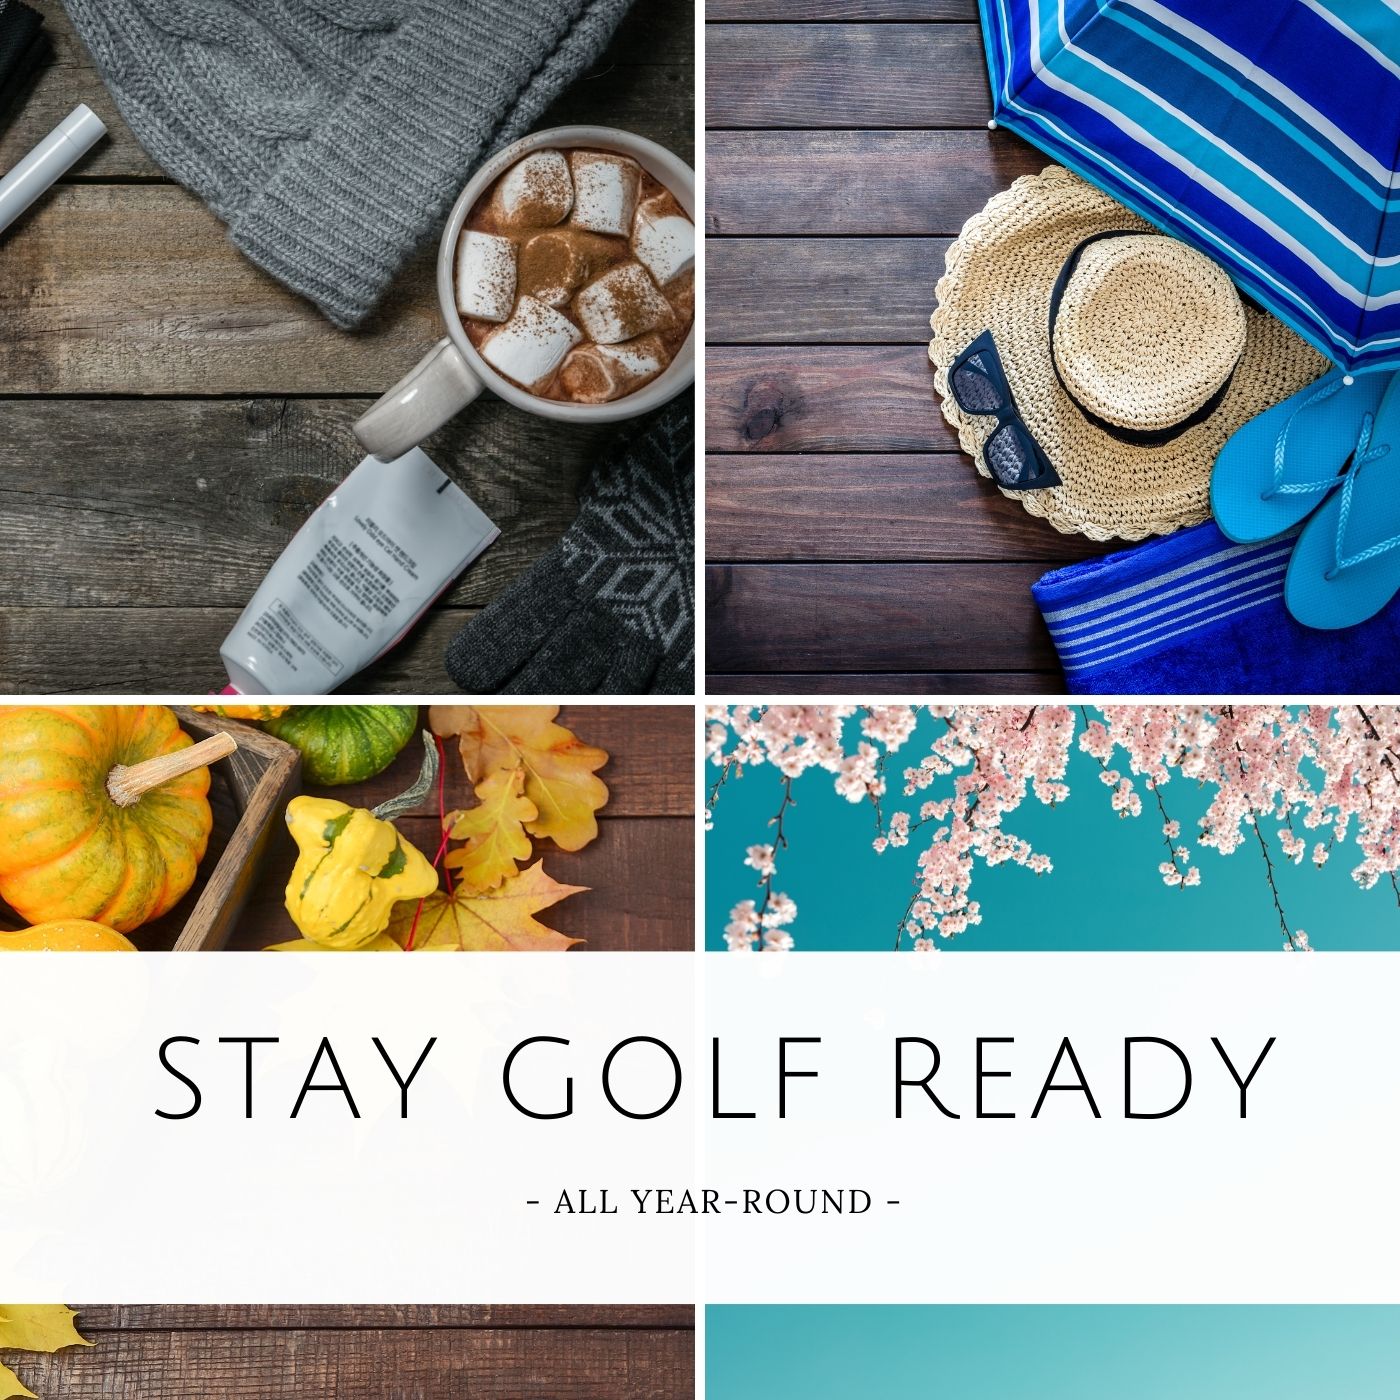 how to stay golf ready all year round